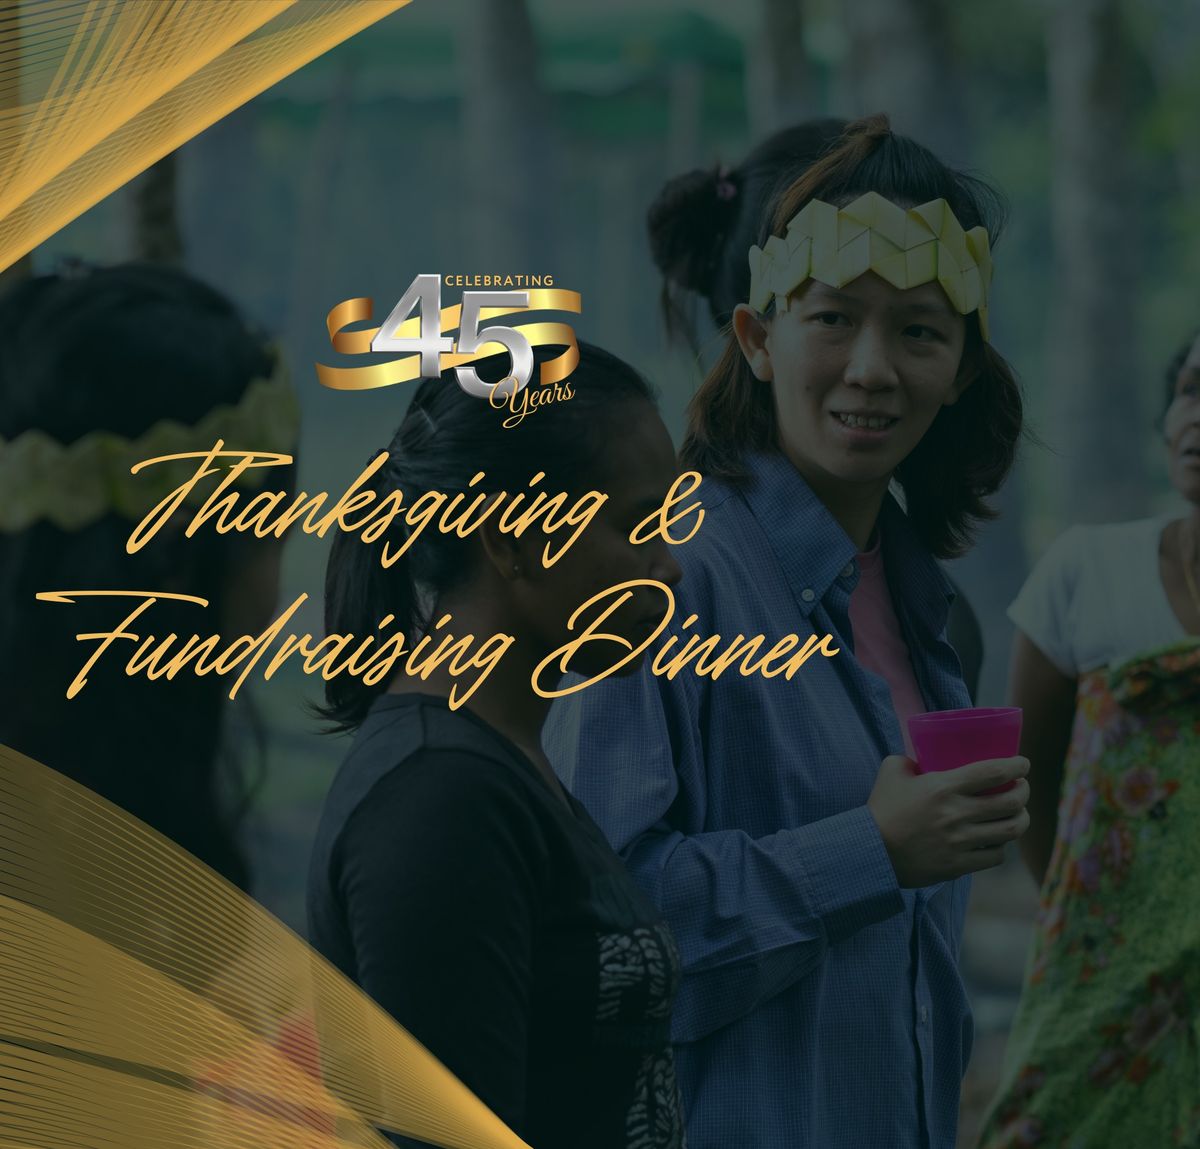 Malaysian CARE's 45th Anniversary Thanksgiving & Fundraising Dinner